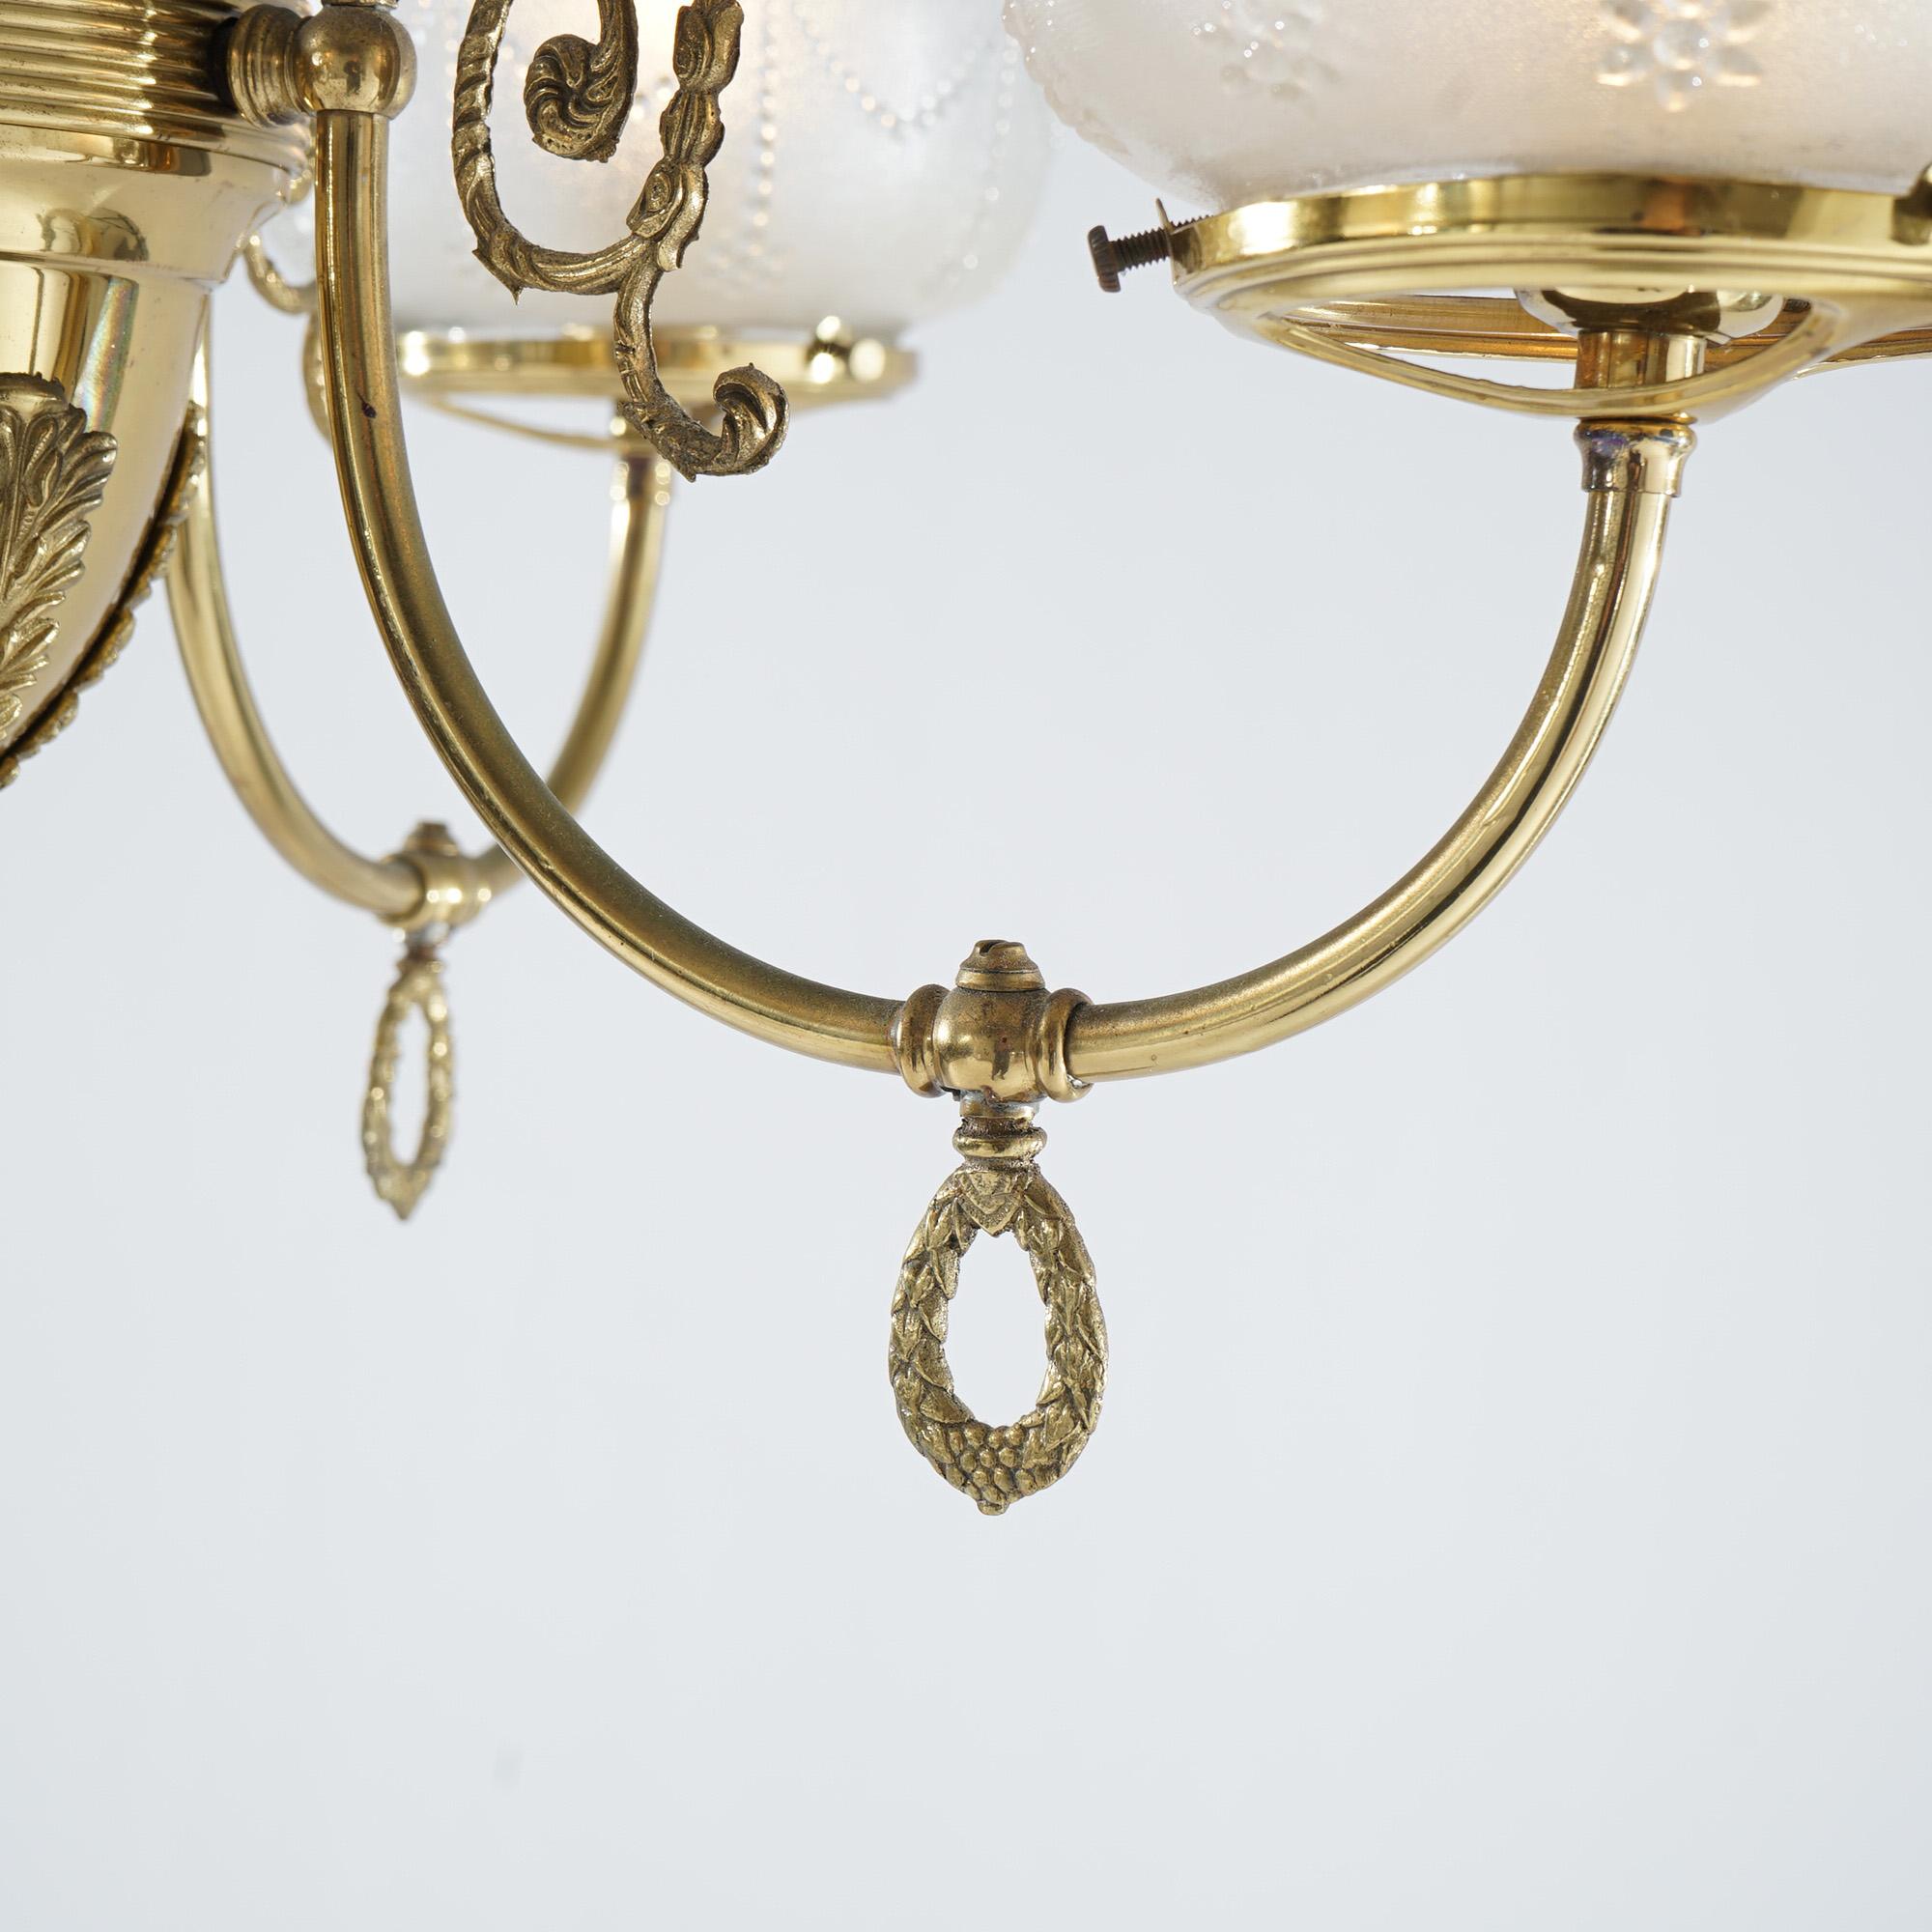 19th Century Antique Brass Four-Light Gas Hanging Fixture, Converted to Electric, 19th C